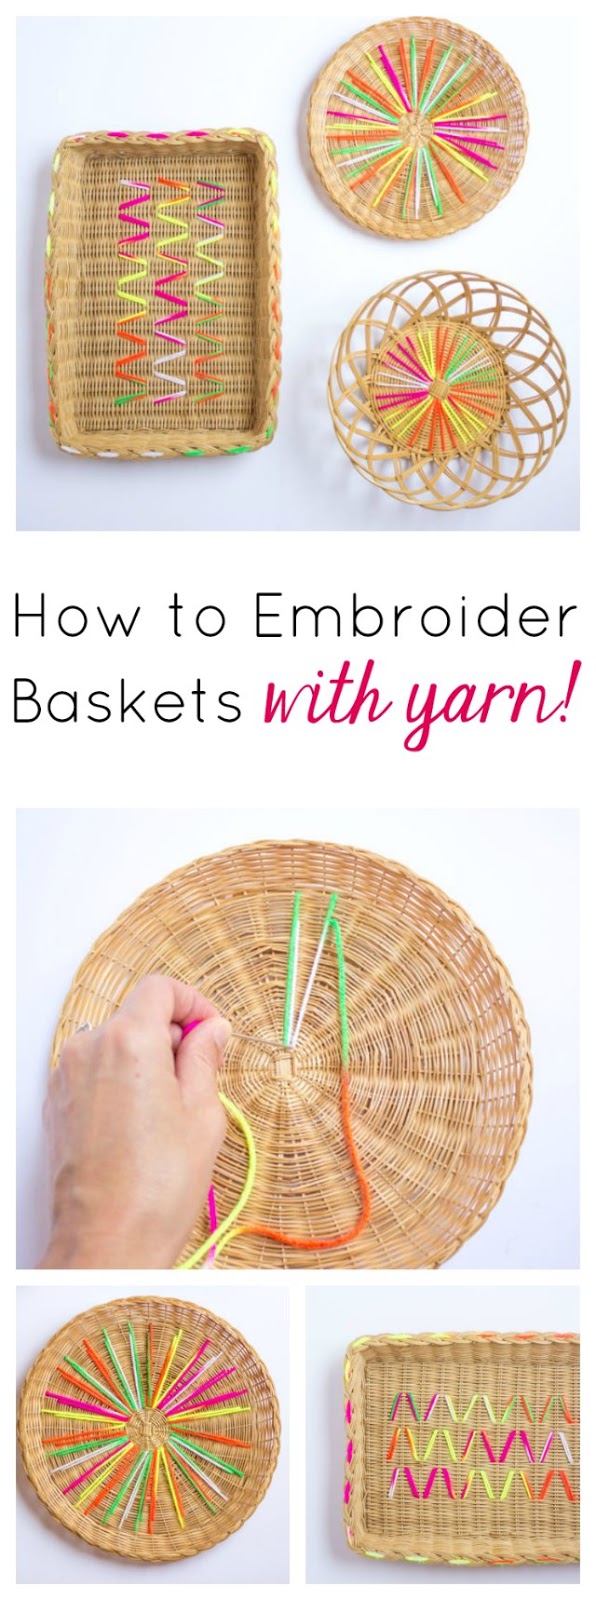 Give thrift store baskets a modern makeover by embroidering them with colorful yarn!